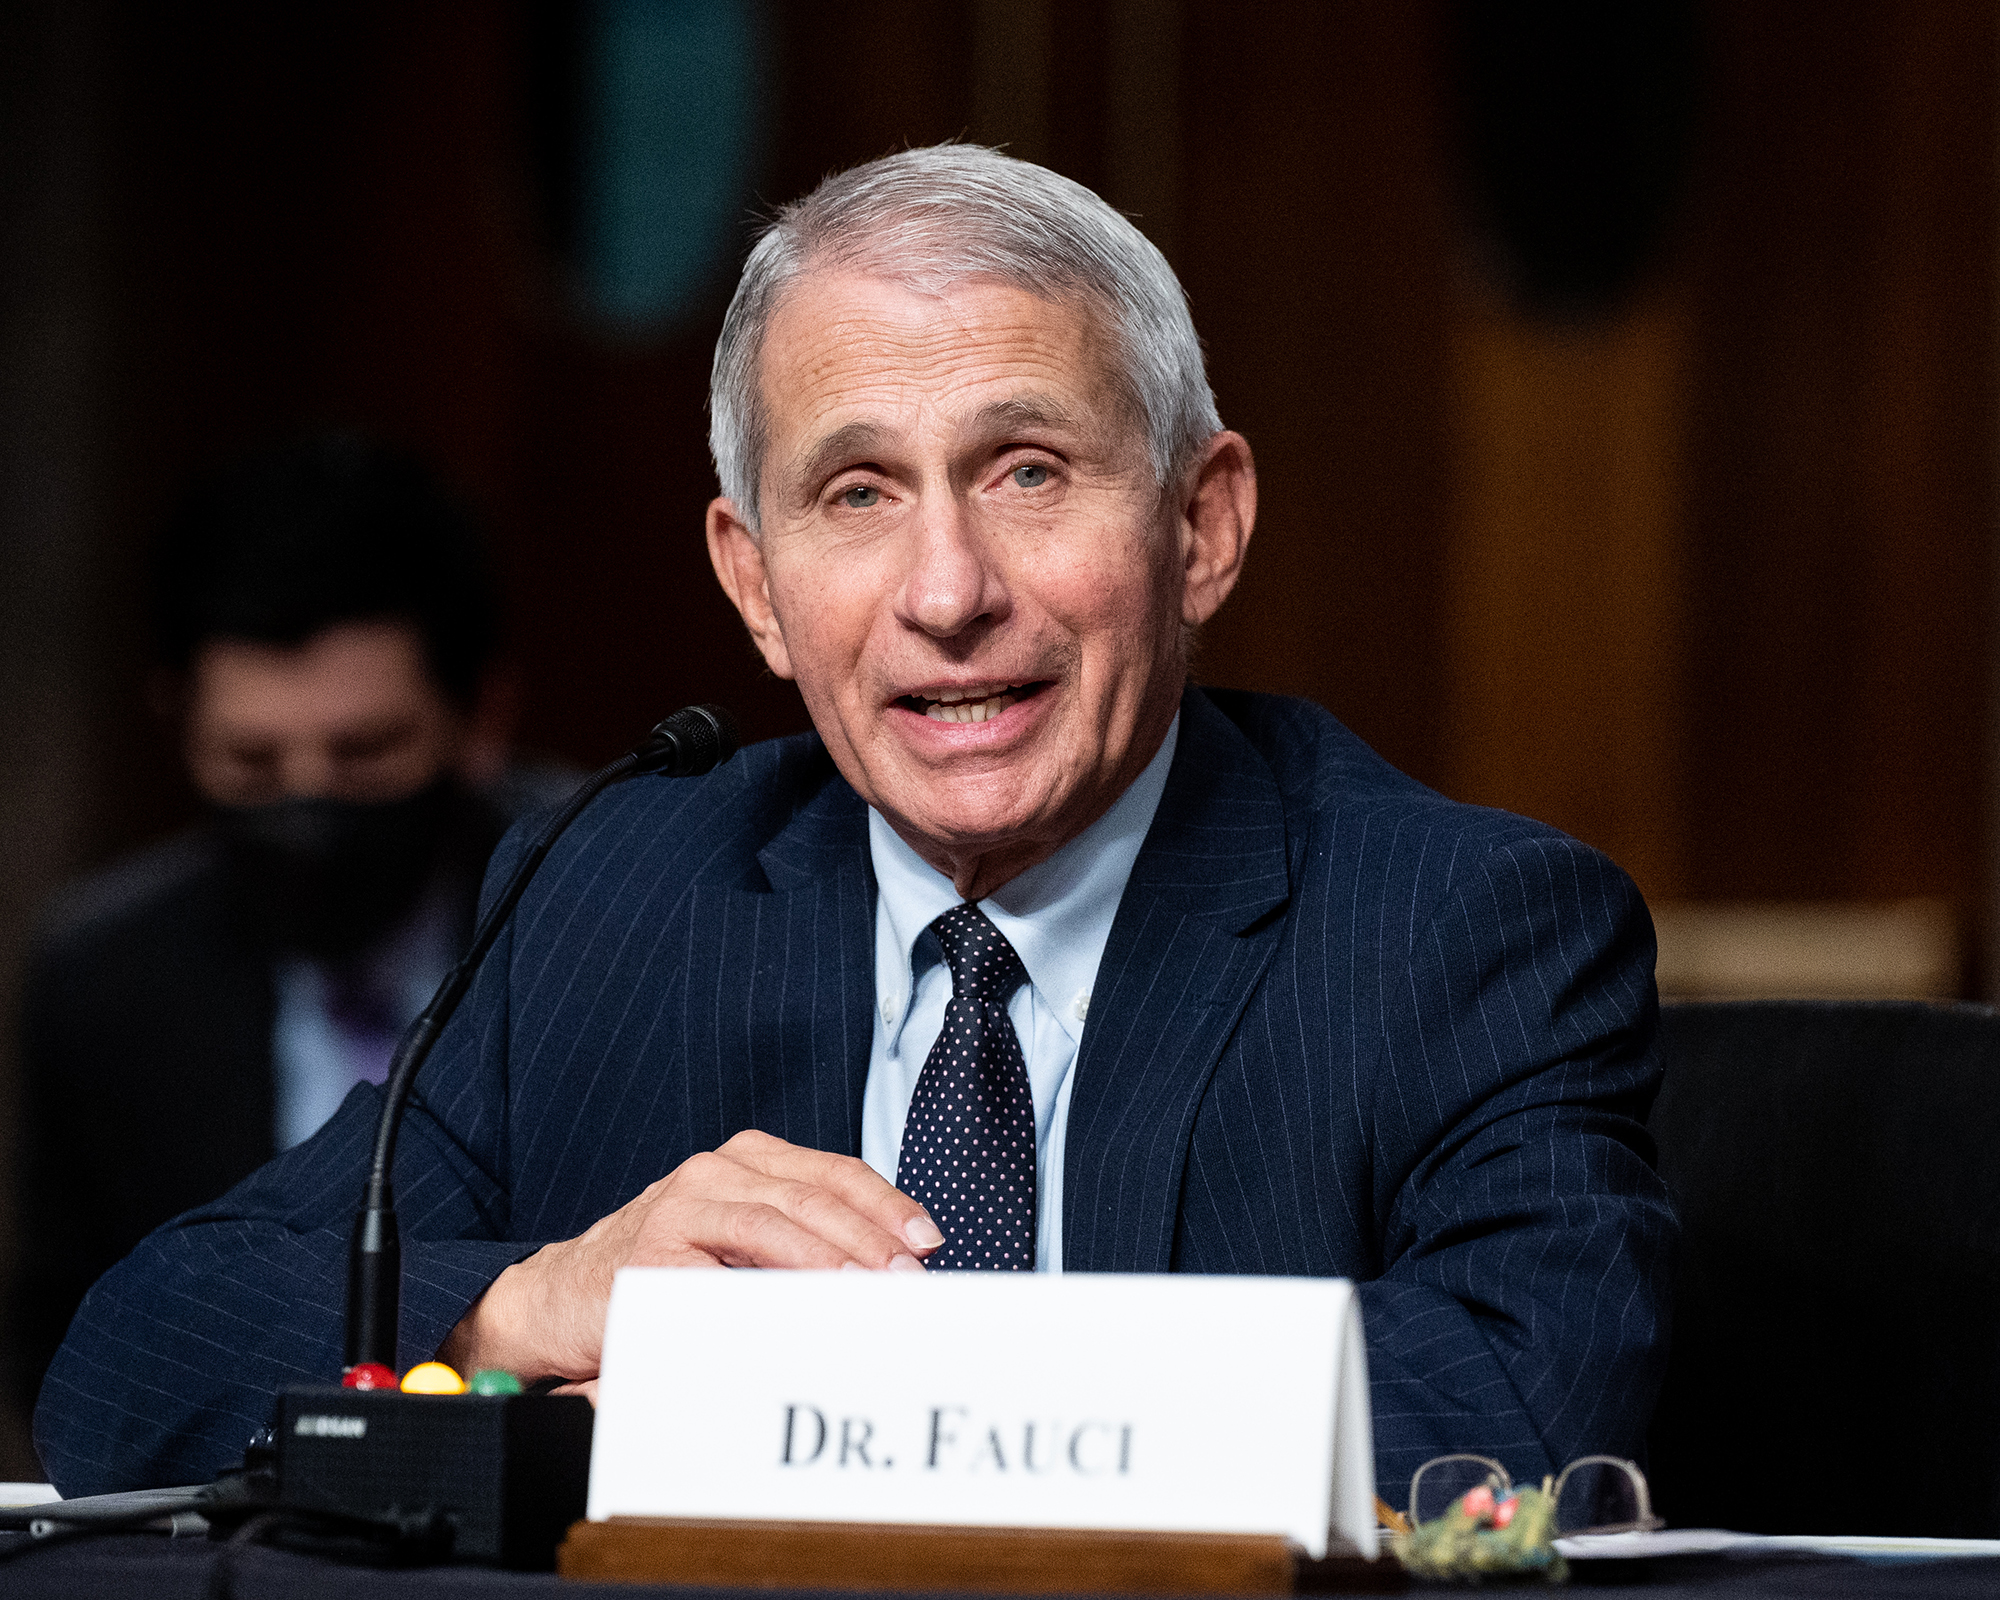 Anthony Fauci, Director, National Institute of Allergy and Infectious Diseases, National Institutes of Health, speaking at a hearing of the Senate Health, Education, Labor, and Pensions Committee on 4th November 2021.